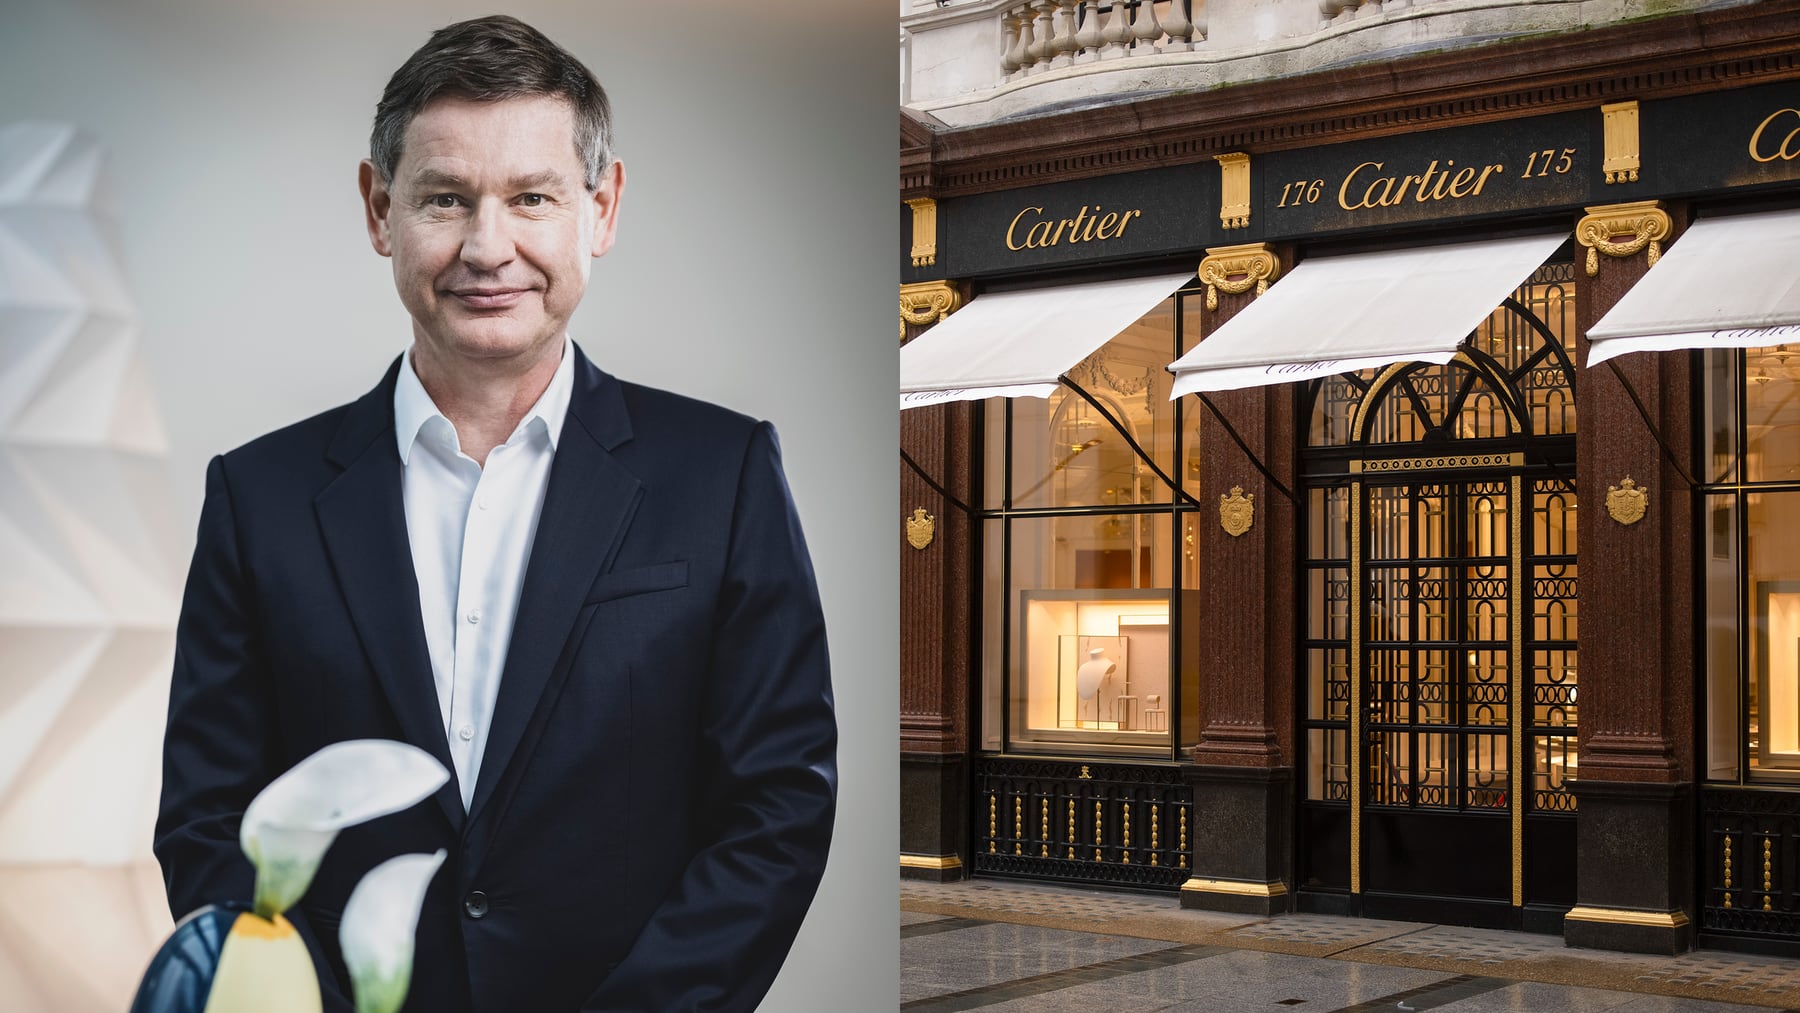 Cartier CEO Cyrille Vigneron; A Cartier store in London, UK. Cartier; Getty Images.